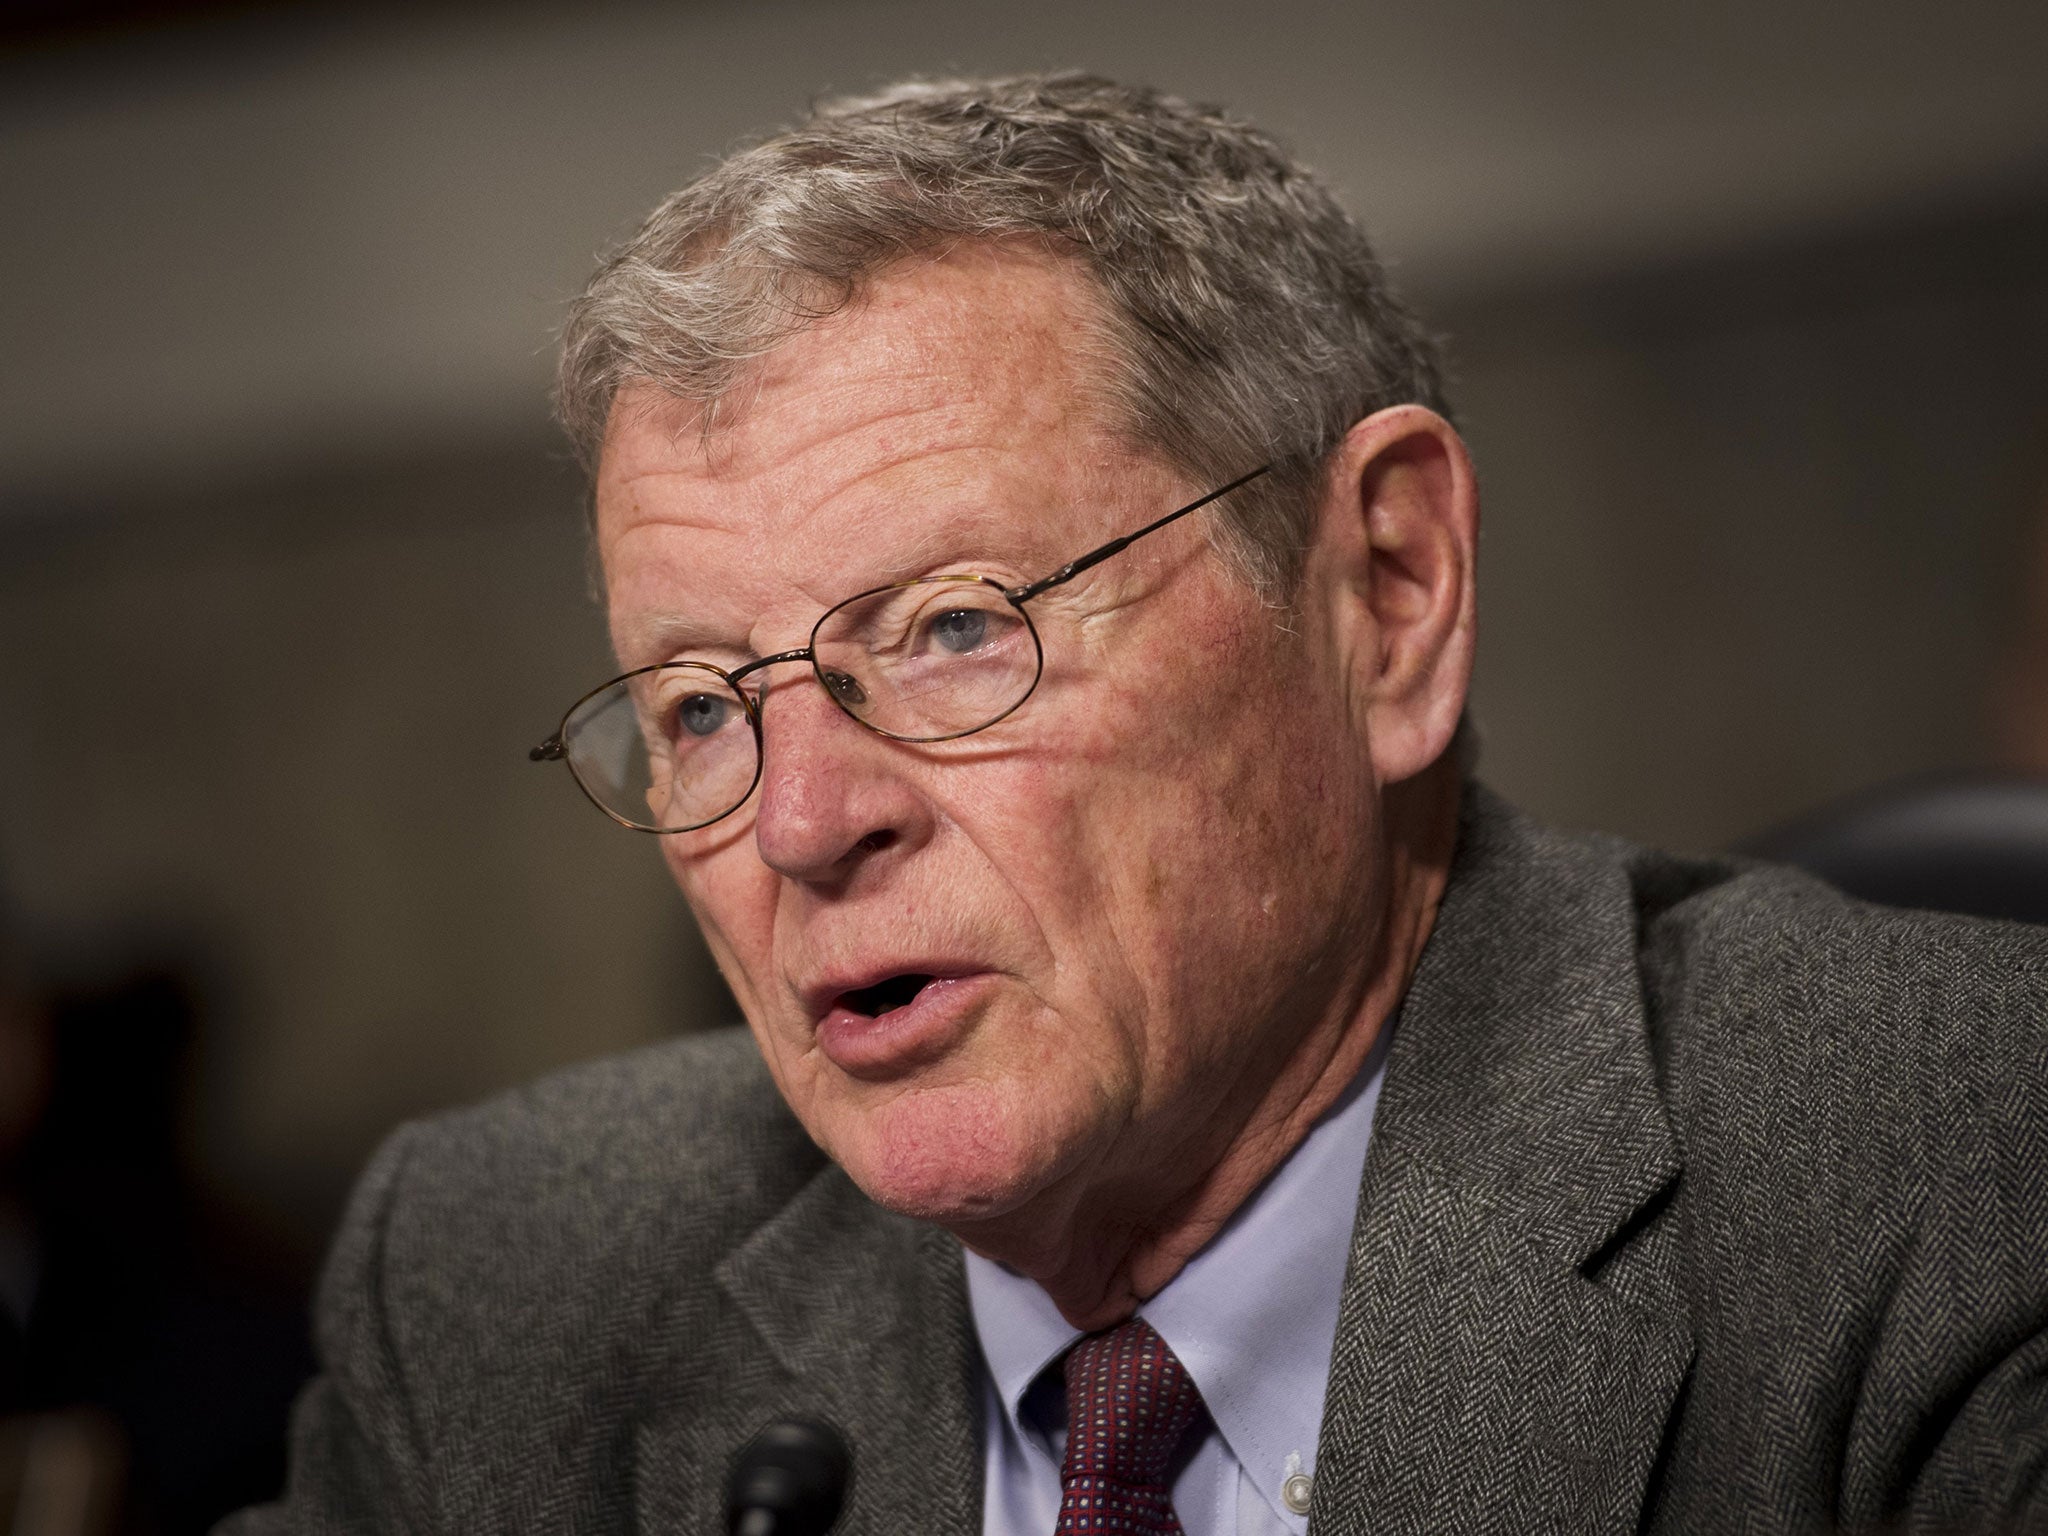 Senator Jim Inhofe believes God will determine the Earth’s climate, not human beings